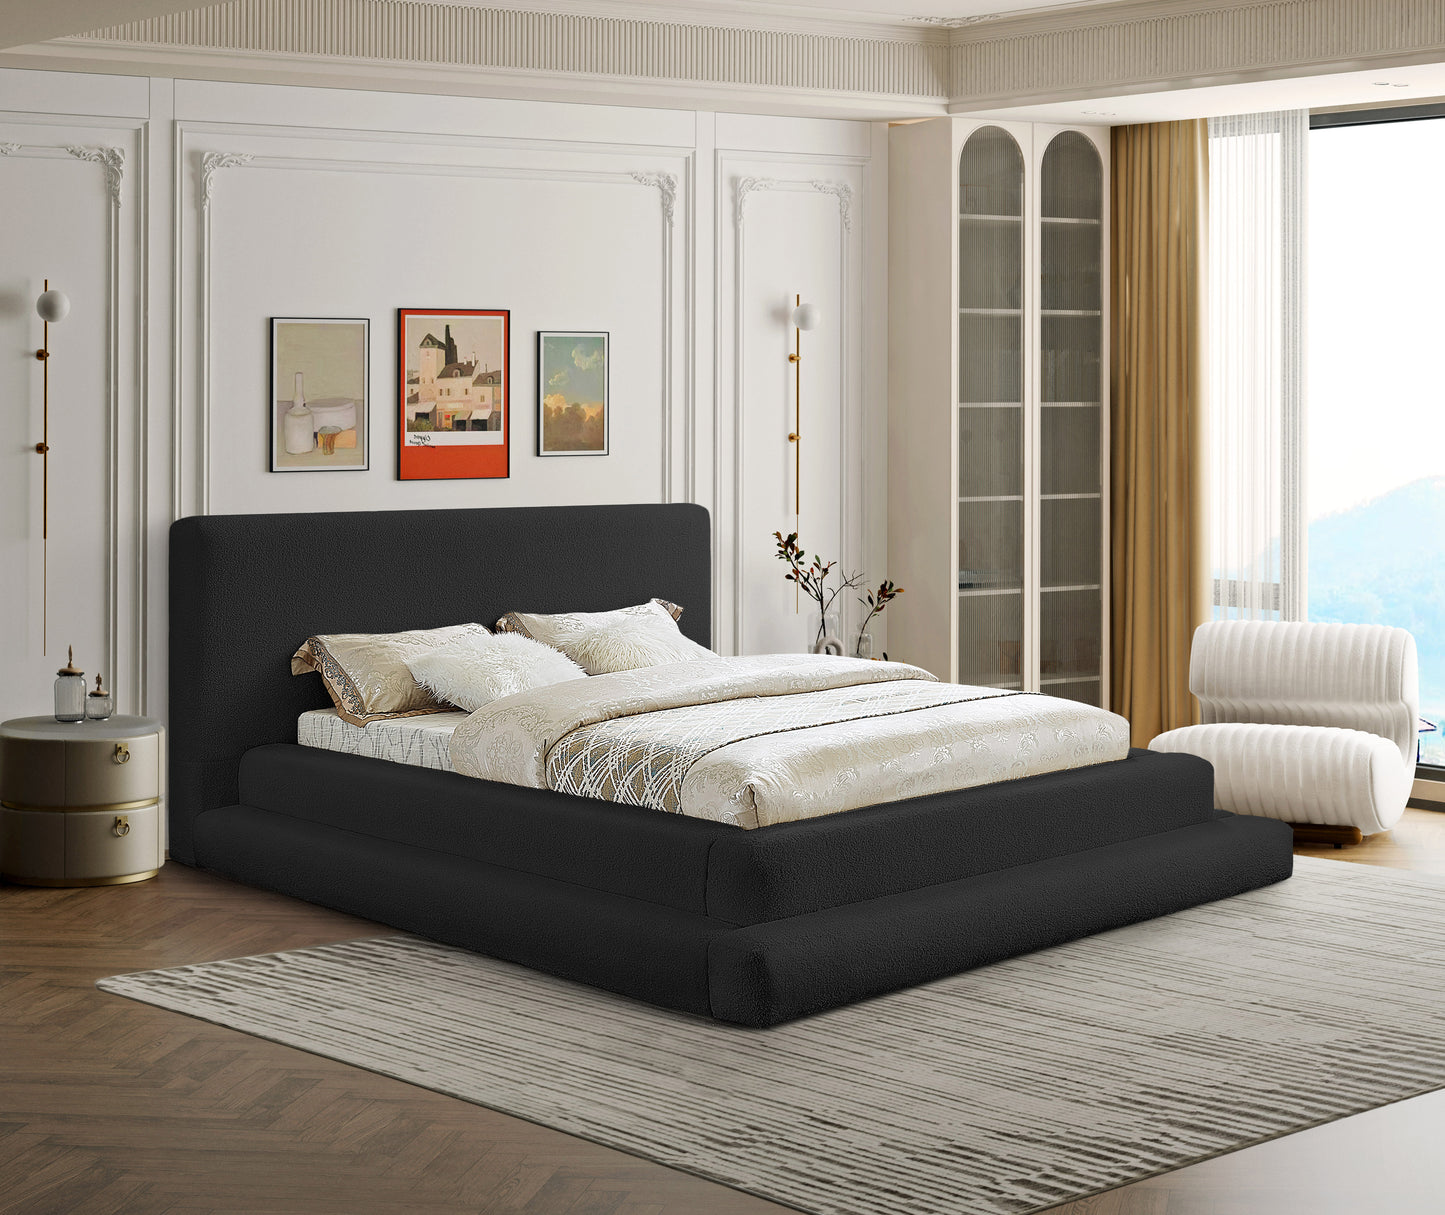 king bed (3 boxes)